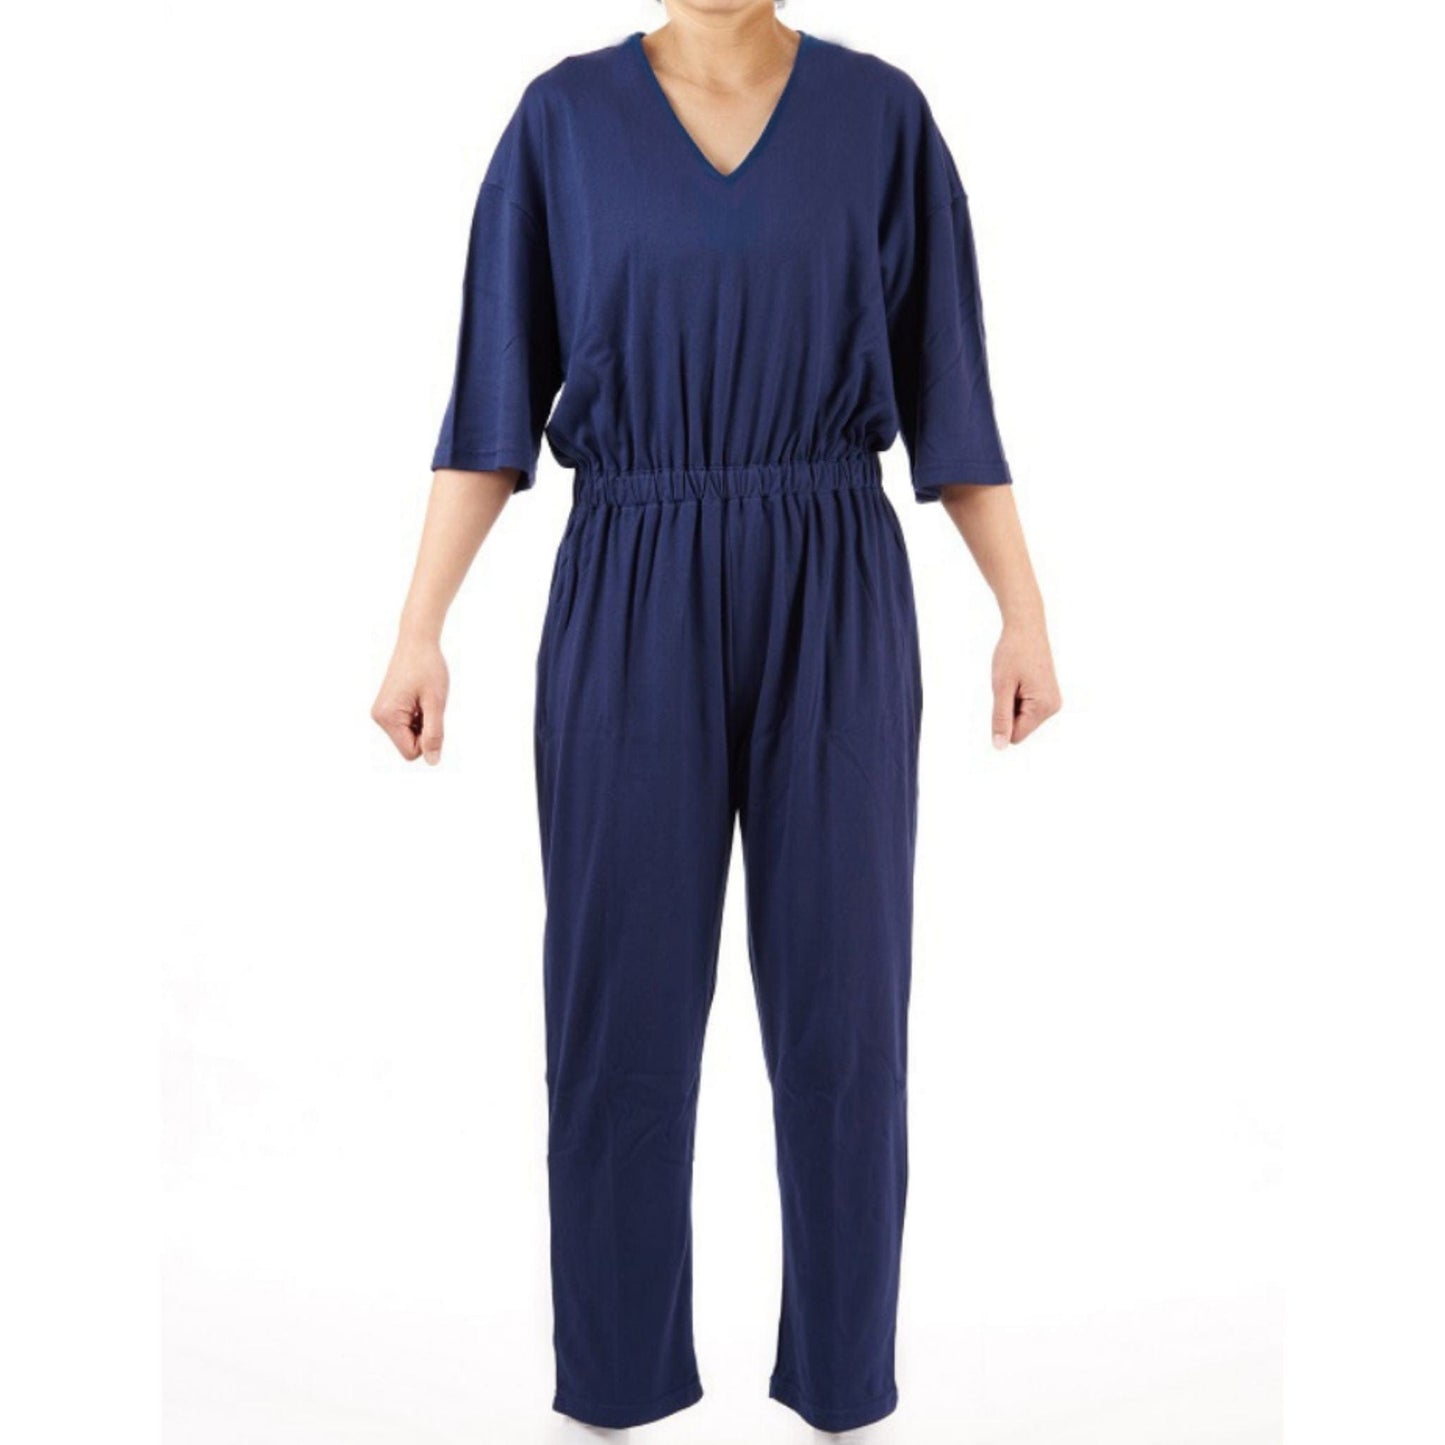 CC Men's Night Jumpsuit with Short Sleeve - Small Only left-Sale - Caring Clothing